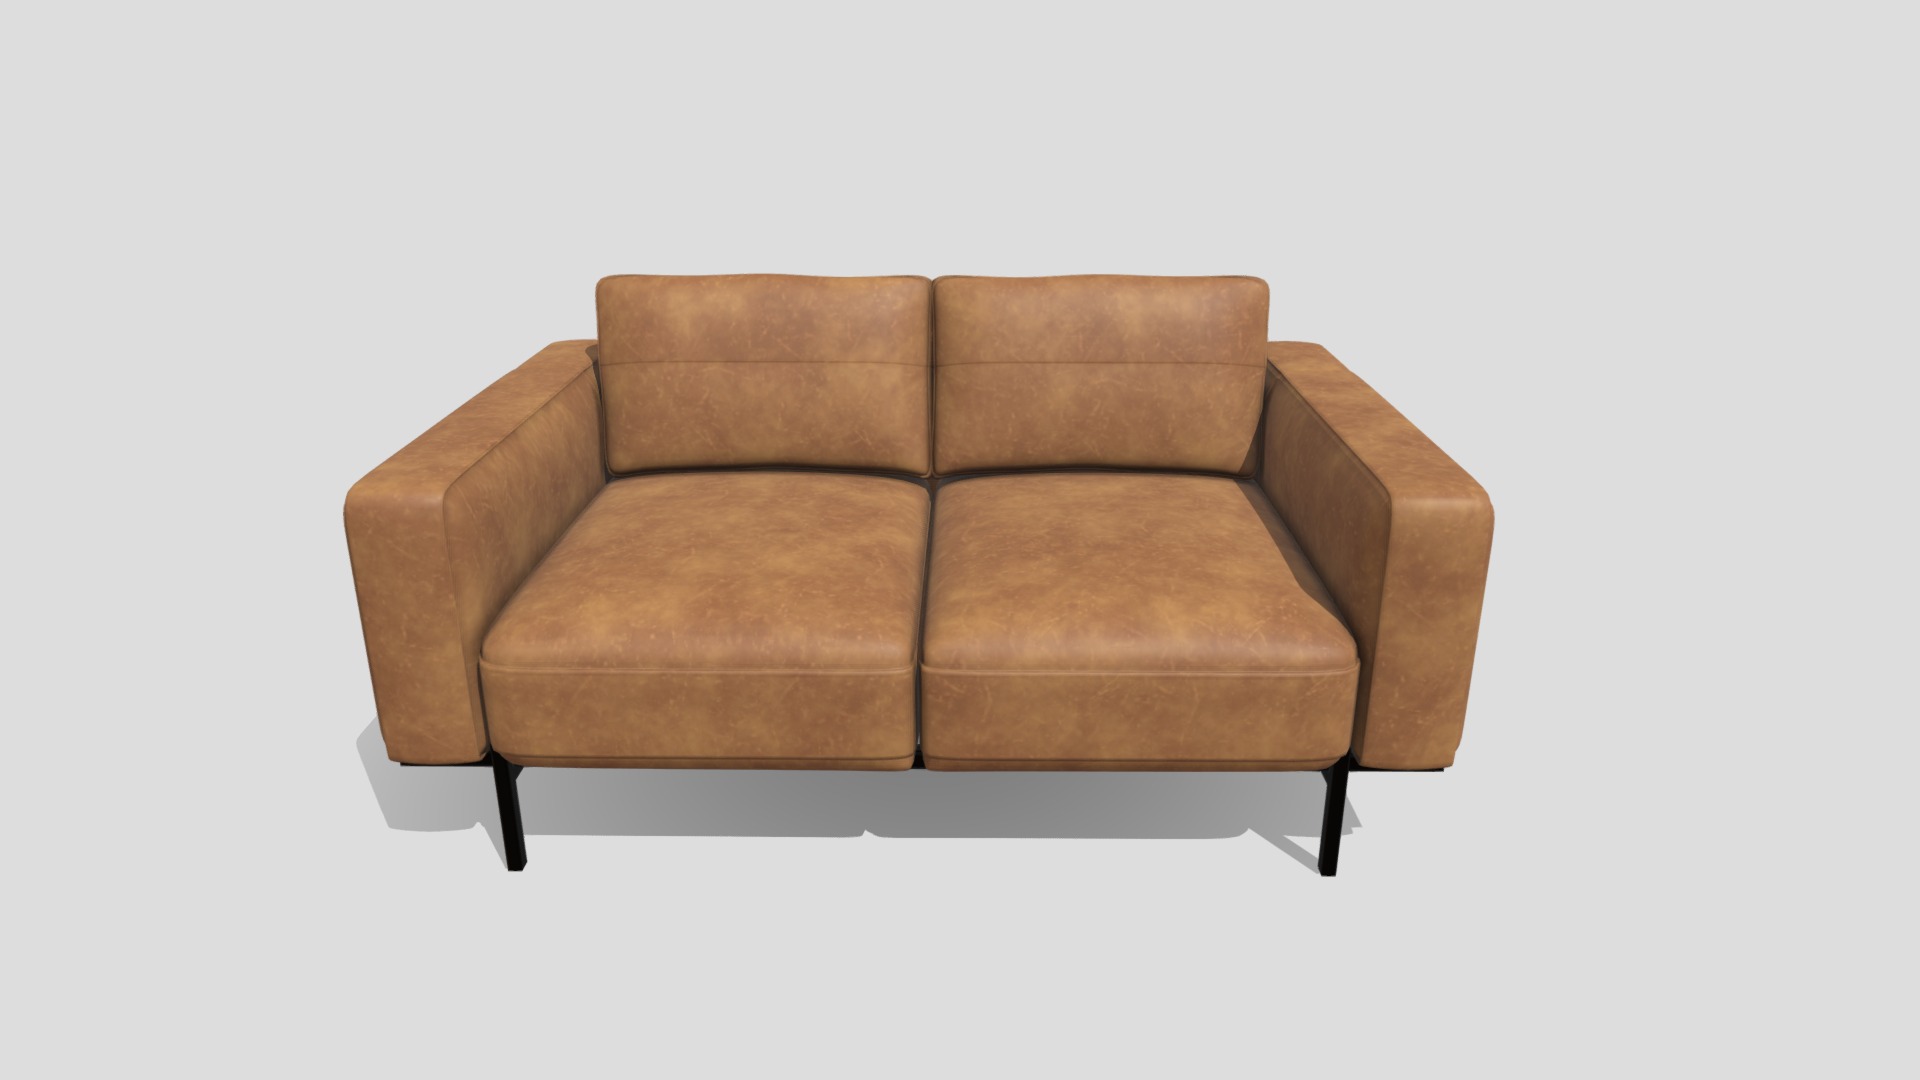 3D model Jarrod 2 Seater Sofa, Outback Tan Leather - This is a 3D model of the Jarrod 2 Seater Sofa, Outback Tan Leather. The 3D model is about a brown leather couch.